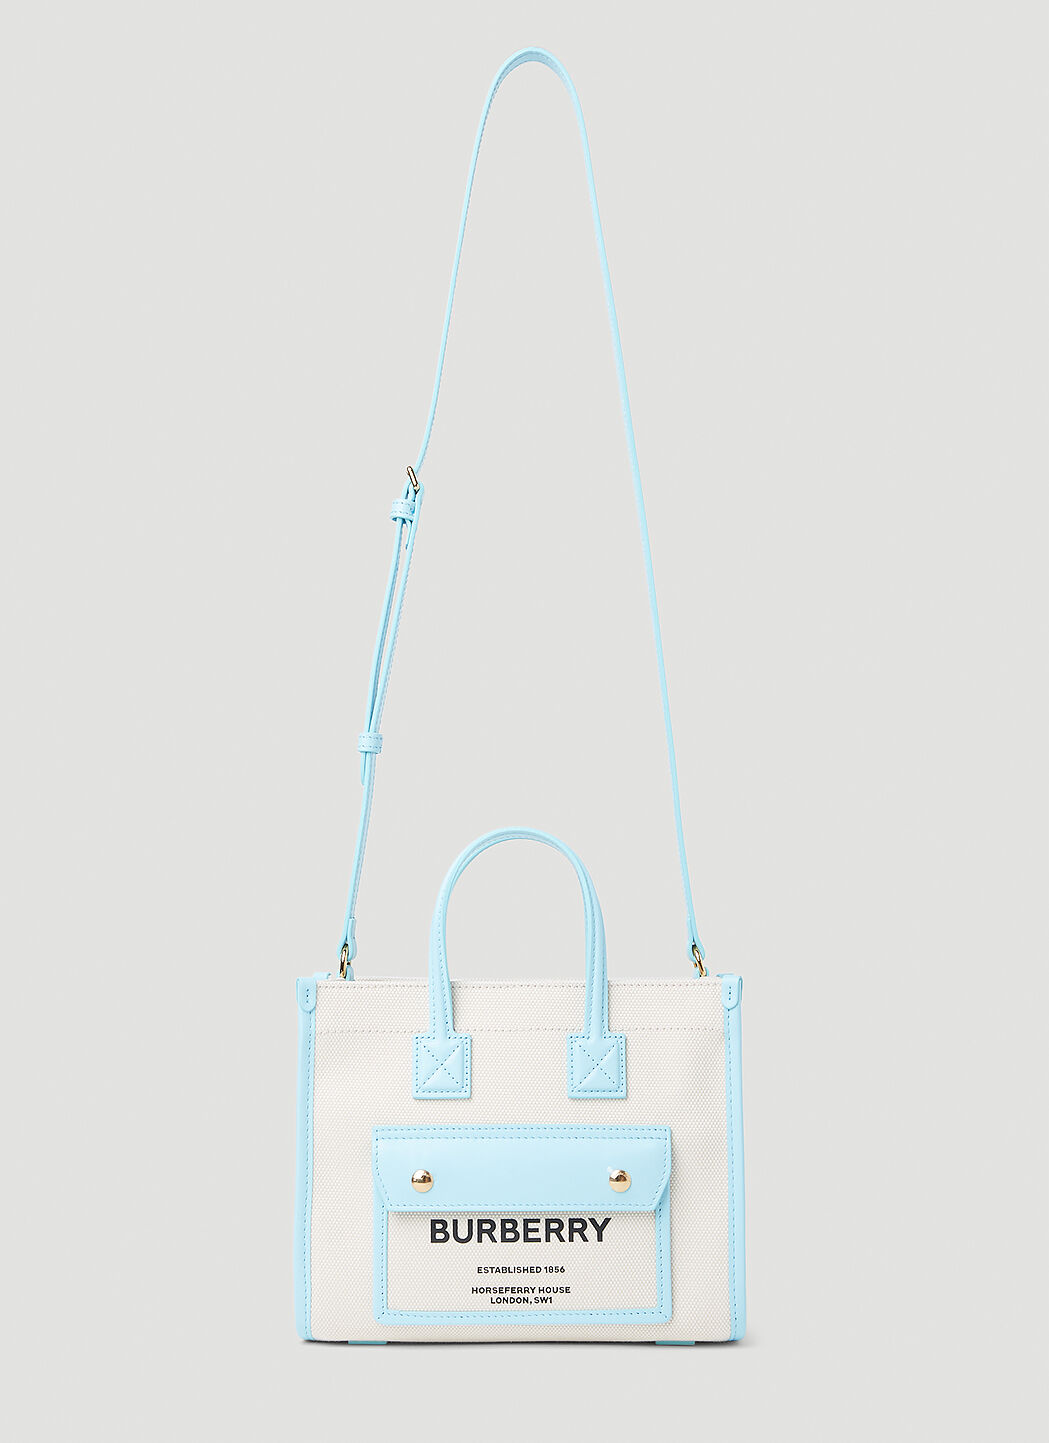 Burberry Bag Nova Classic Tote - clothing & accessories - by owner -  apparel sale - craigslist